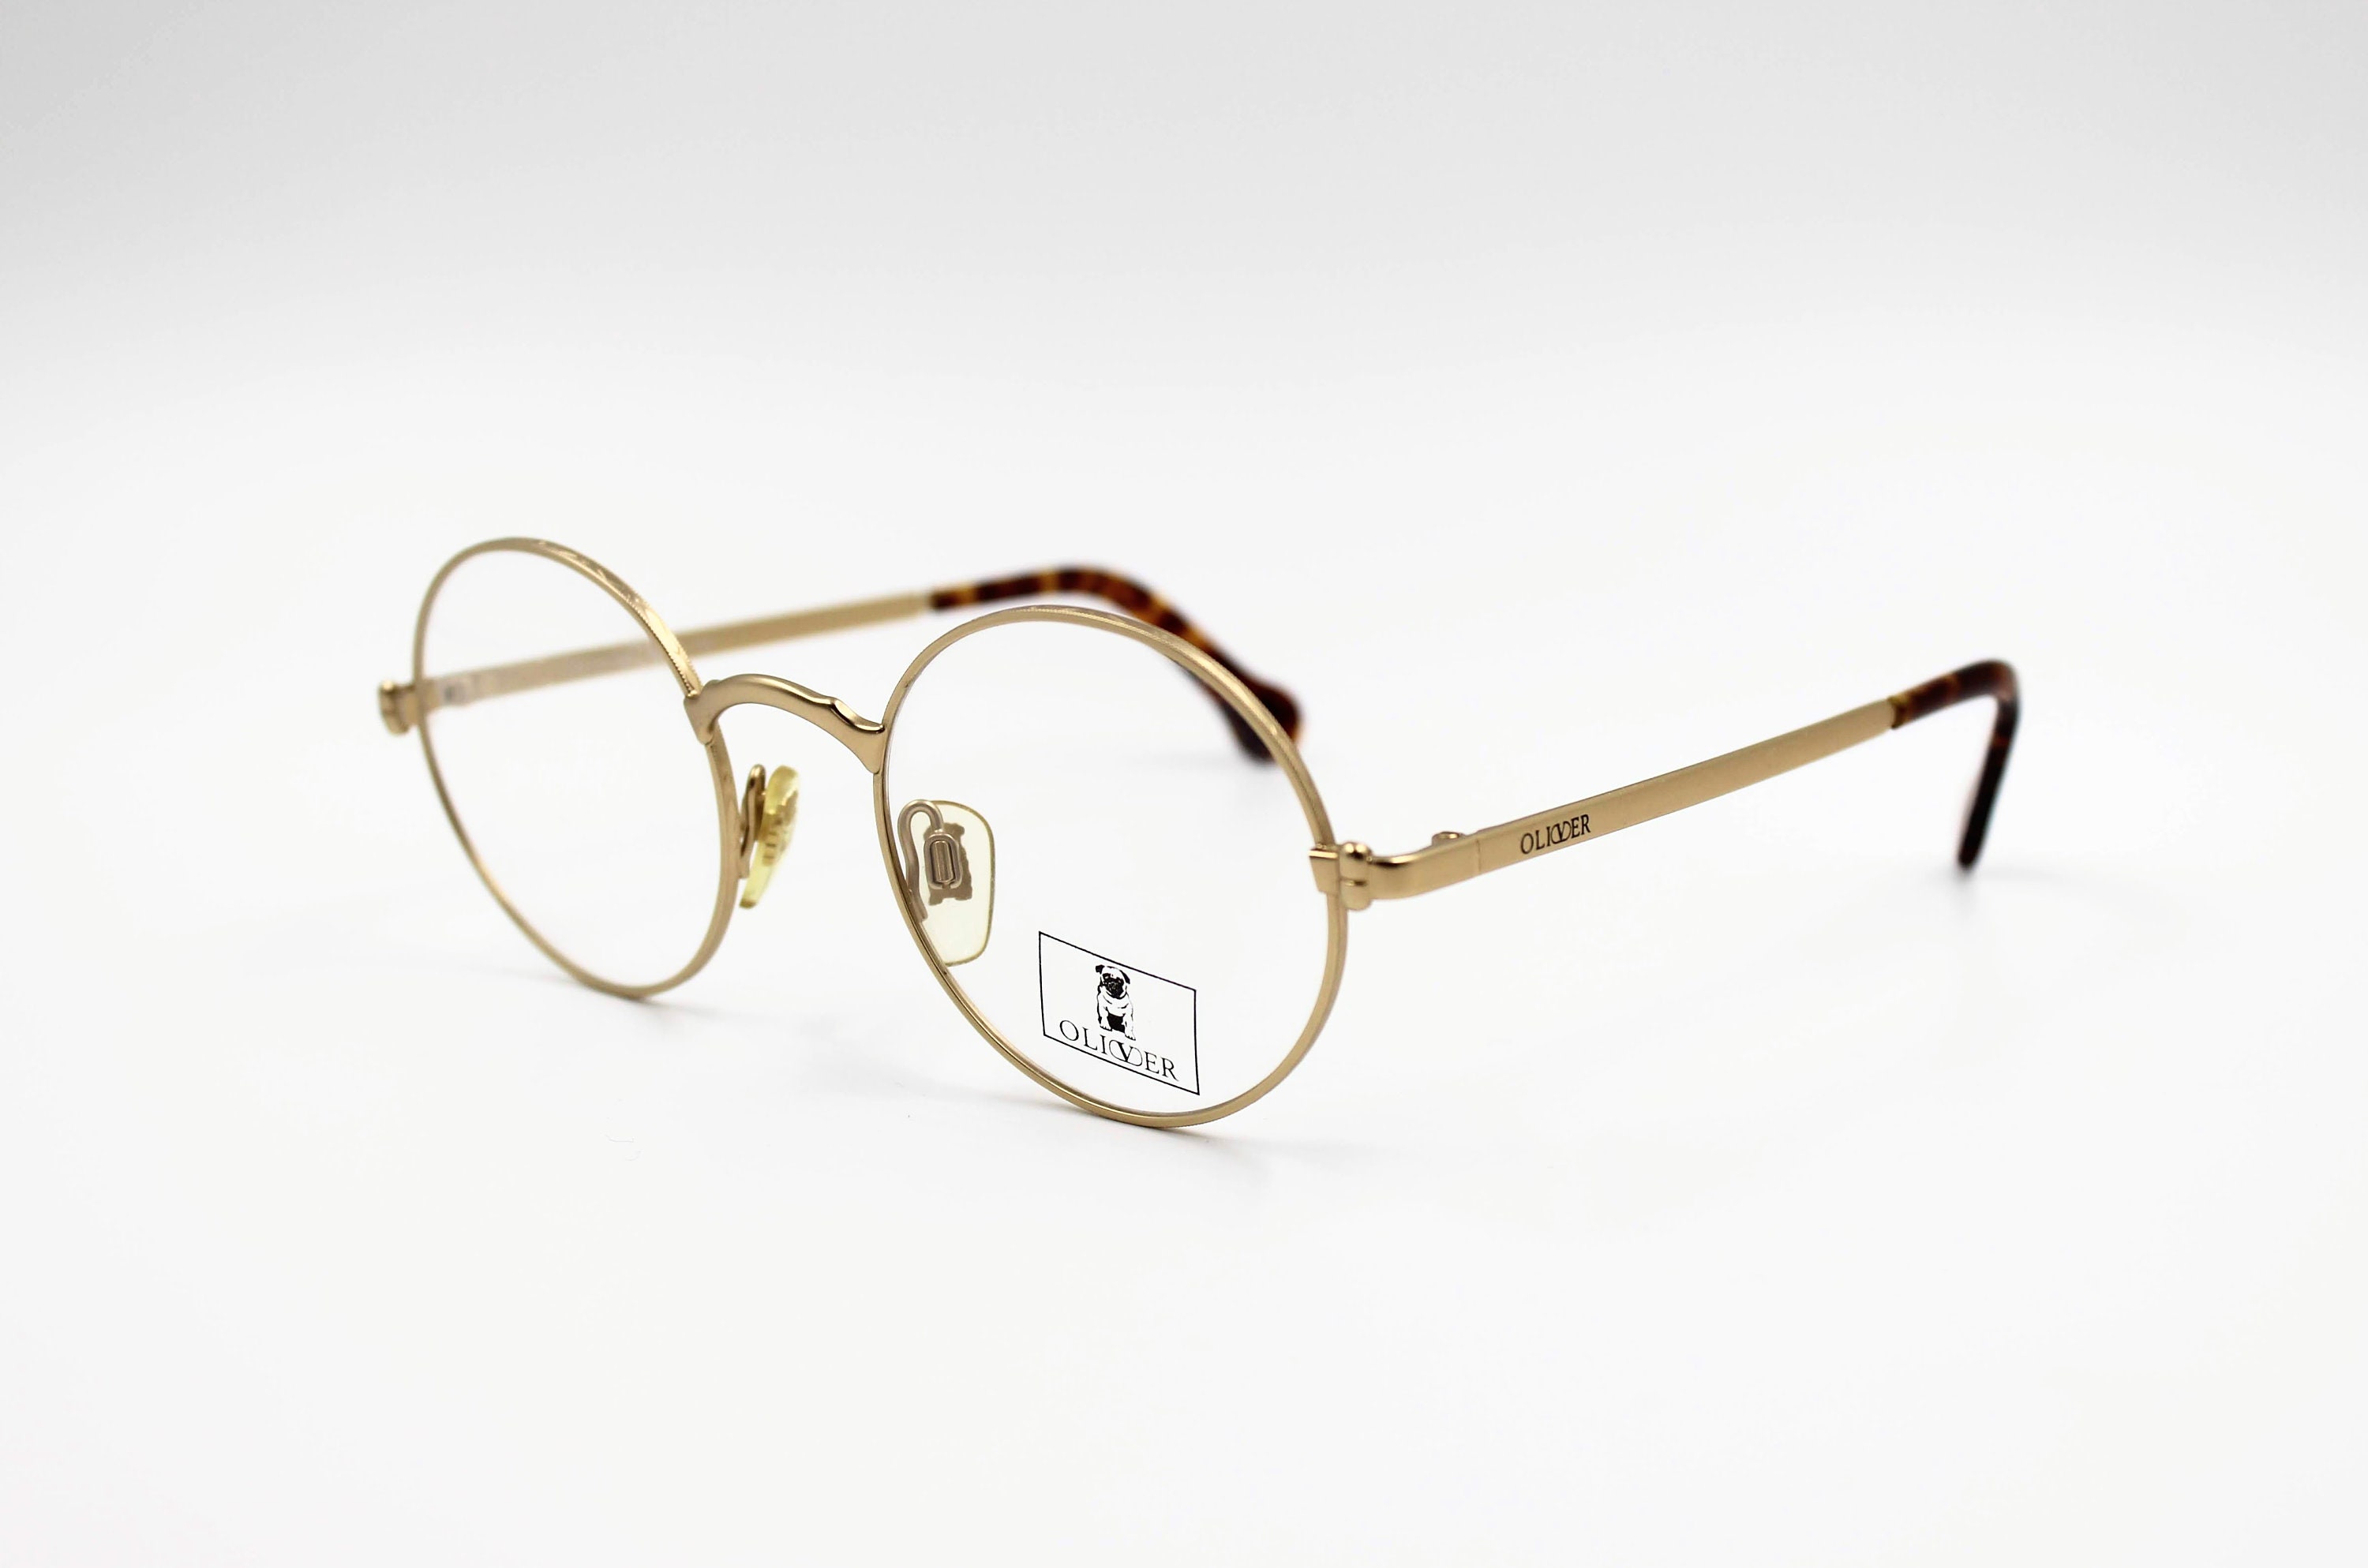 Vintage Eyewear Oliver by Valentino 1342 Authentic and Rare Hand Made ...